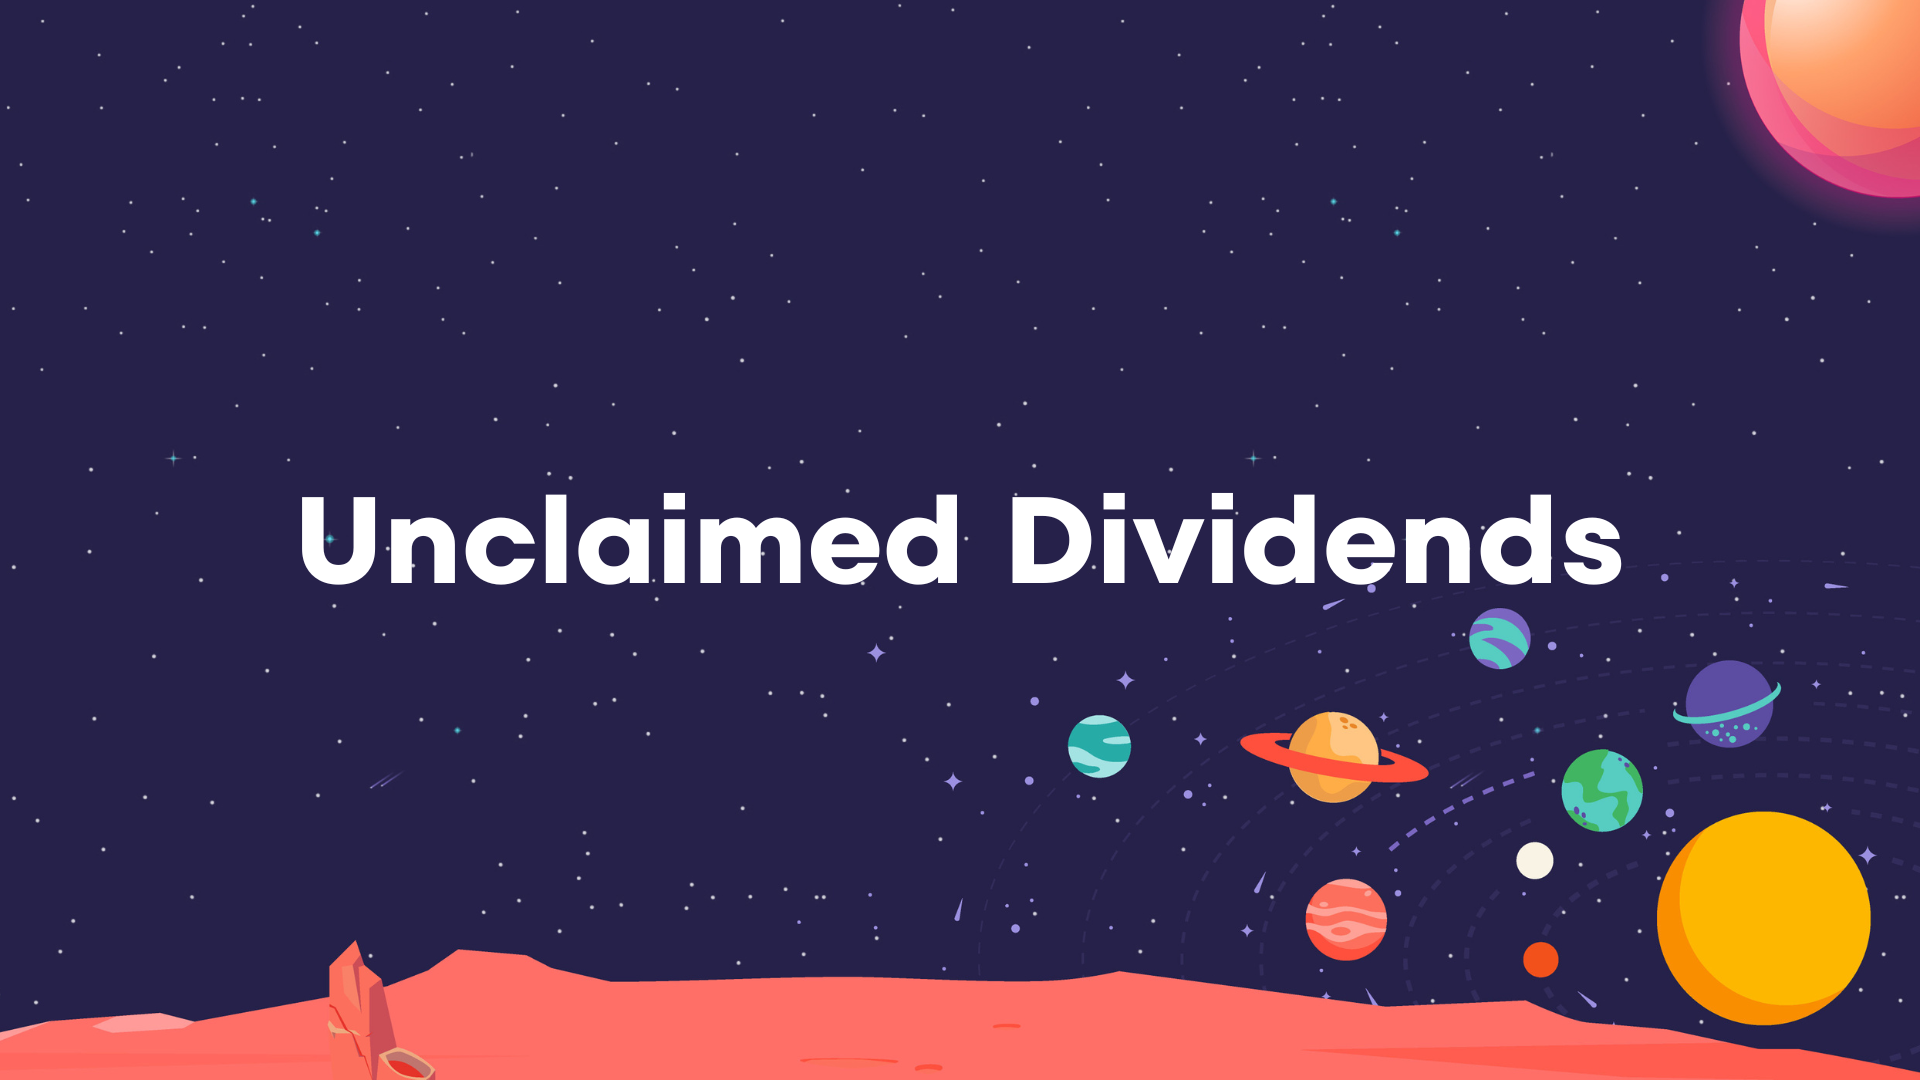 Unclaimed Dividends - What Is It?